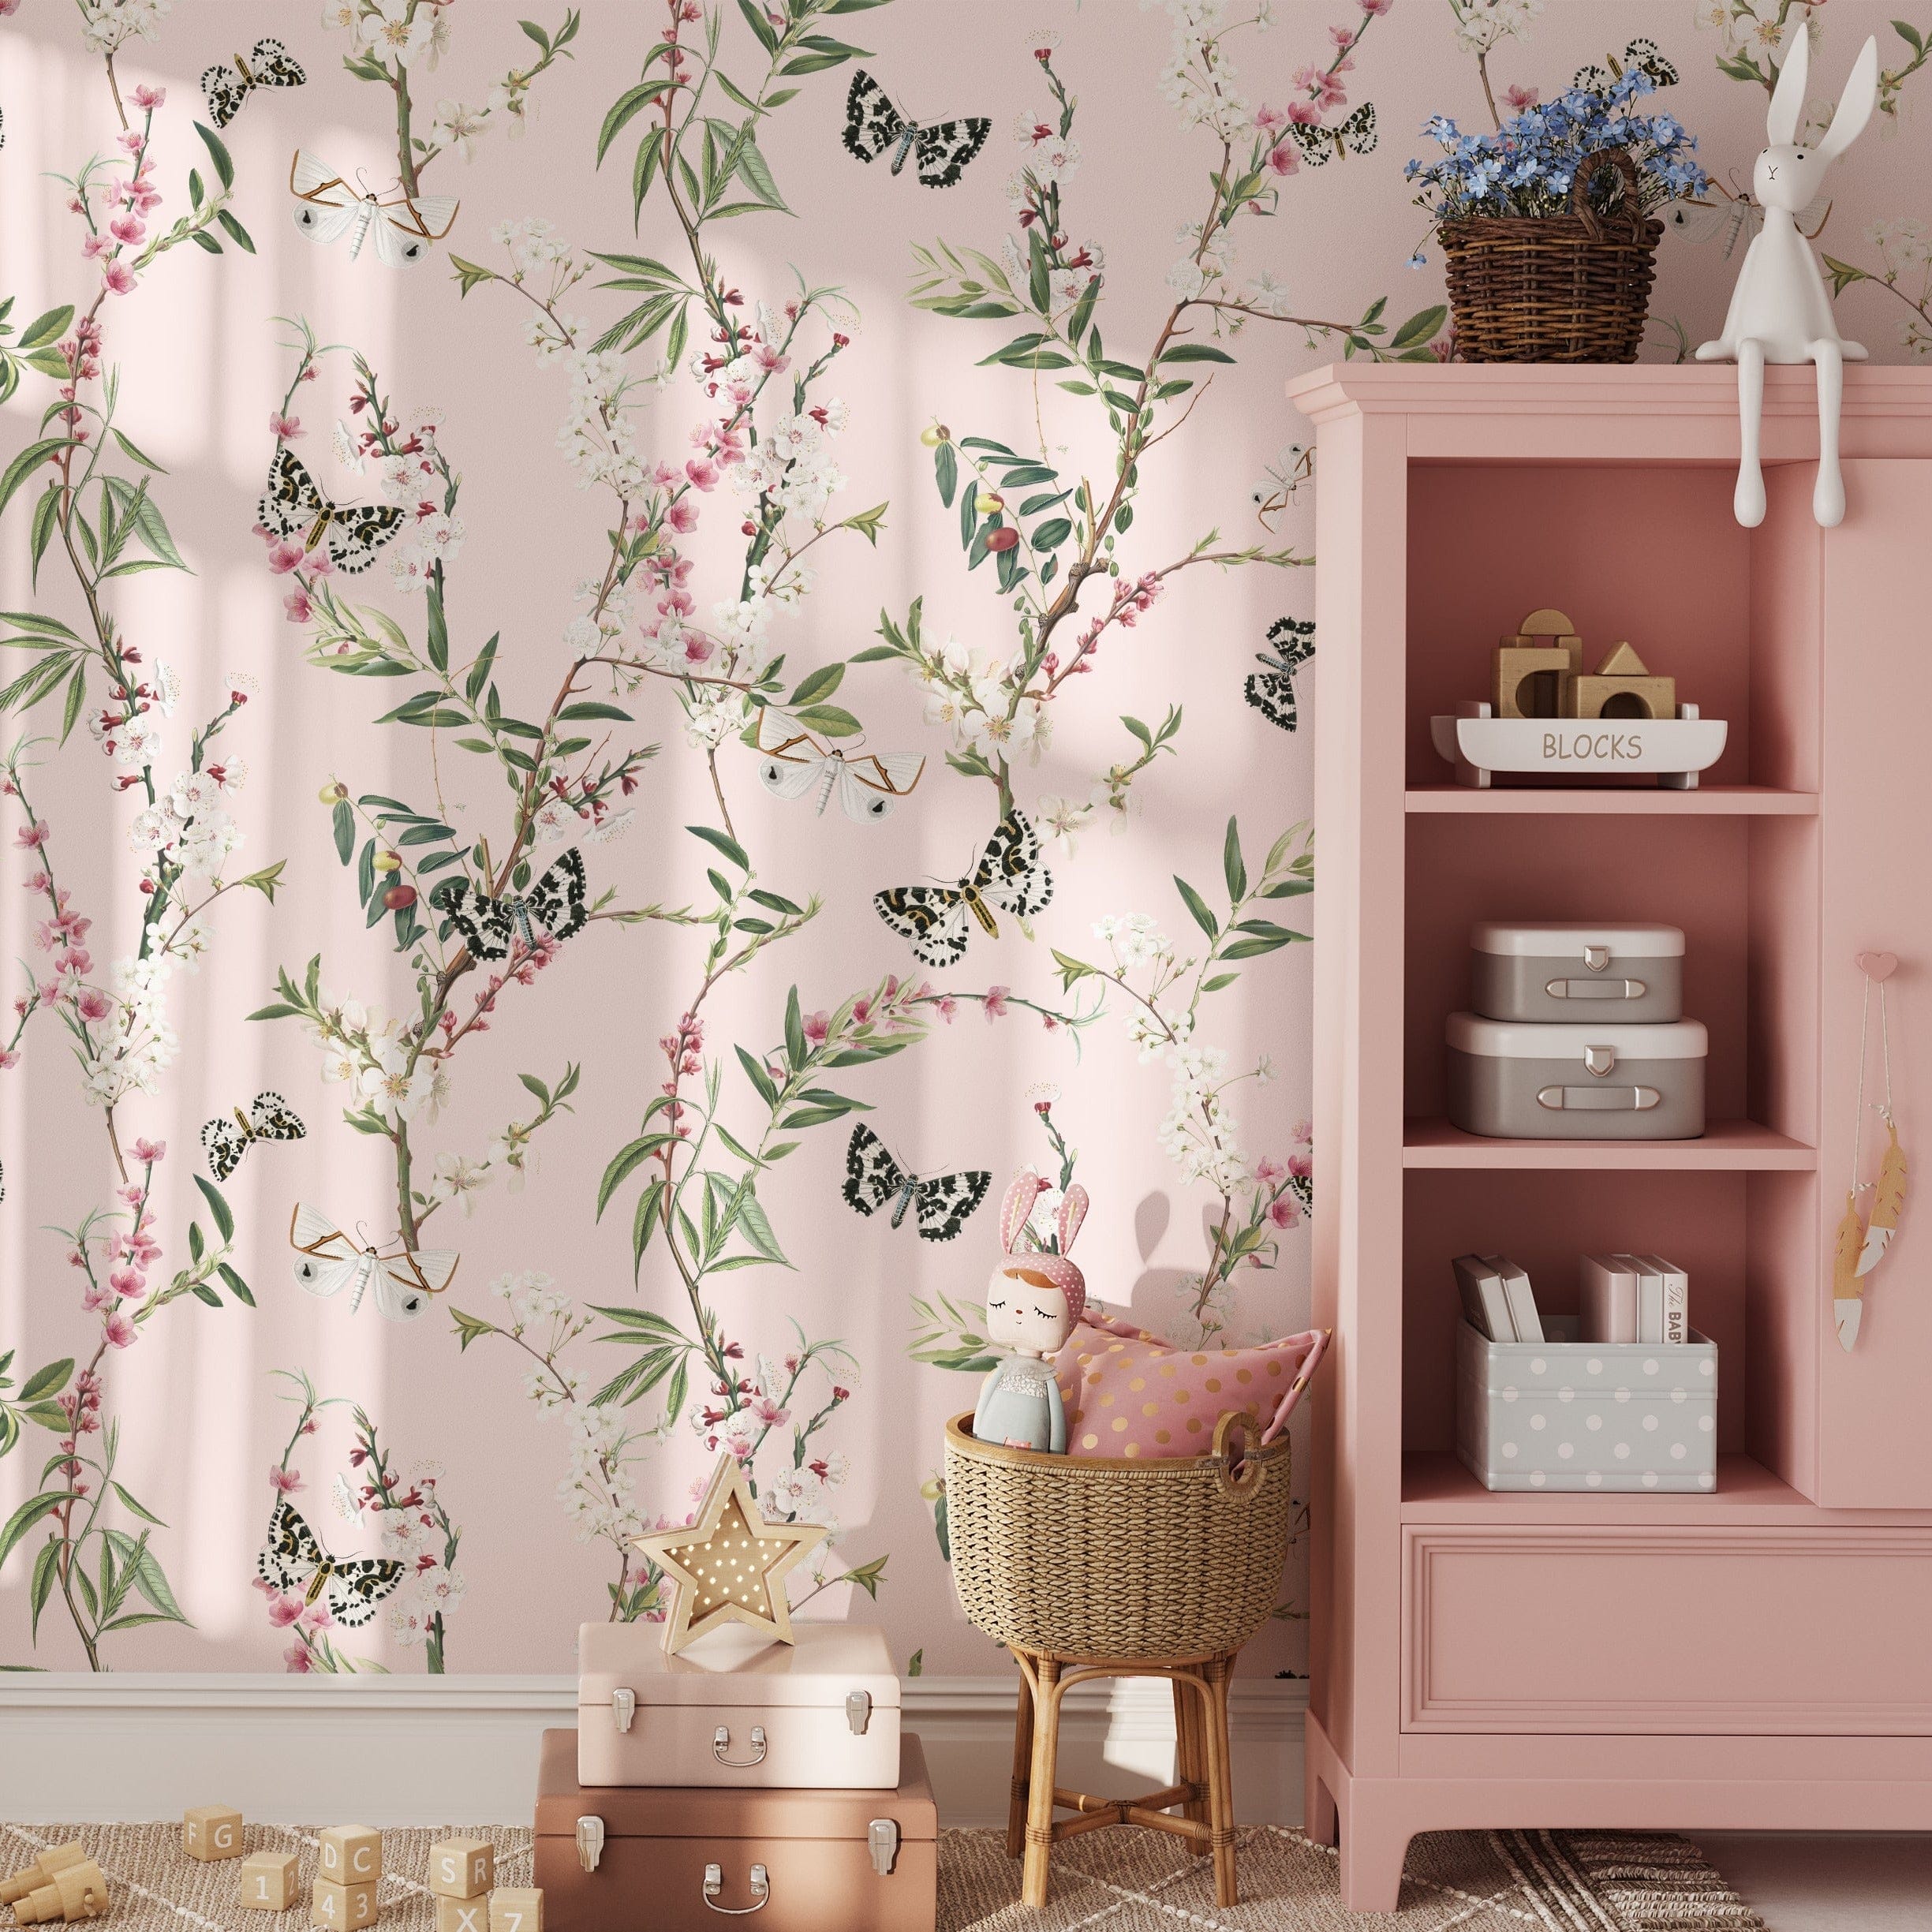 A charming children's room decorated with Enchanting Butterflies Wallpaper. The whimsical design of butterflies and blooming branches adds a playful yet elegant touch to the room, complementing the pink furniture and toys, and creating a delightful and inviting space for kids.